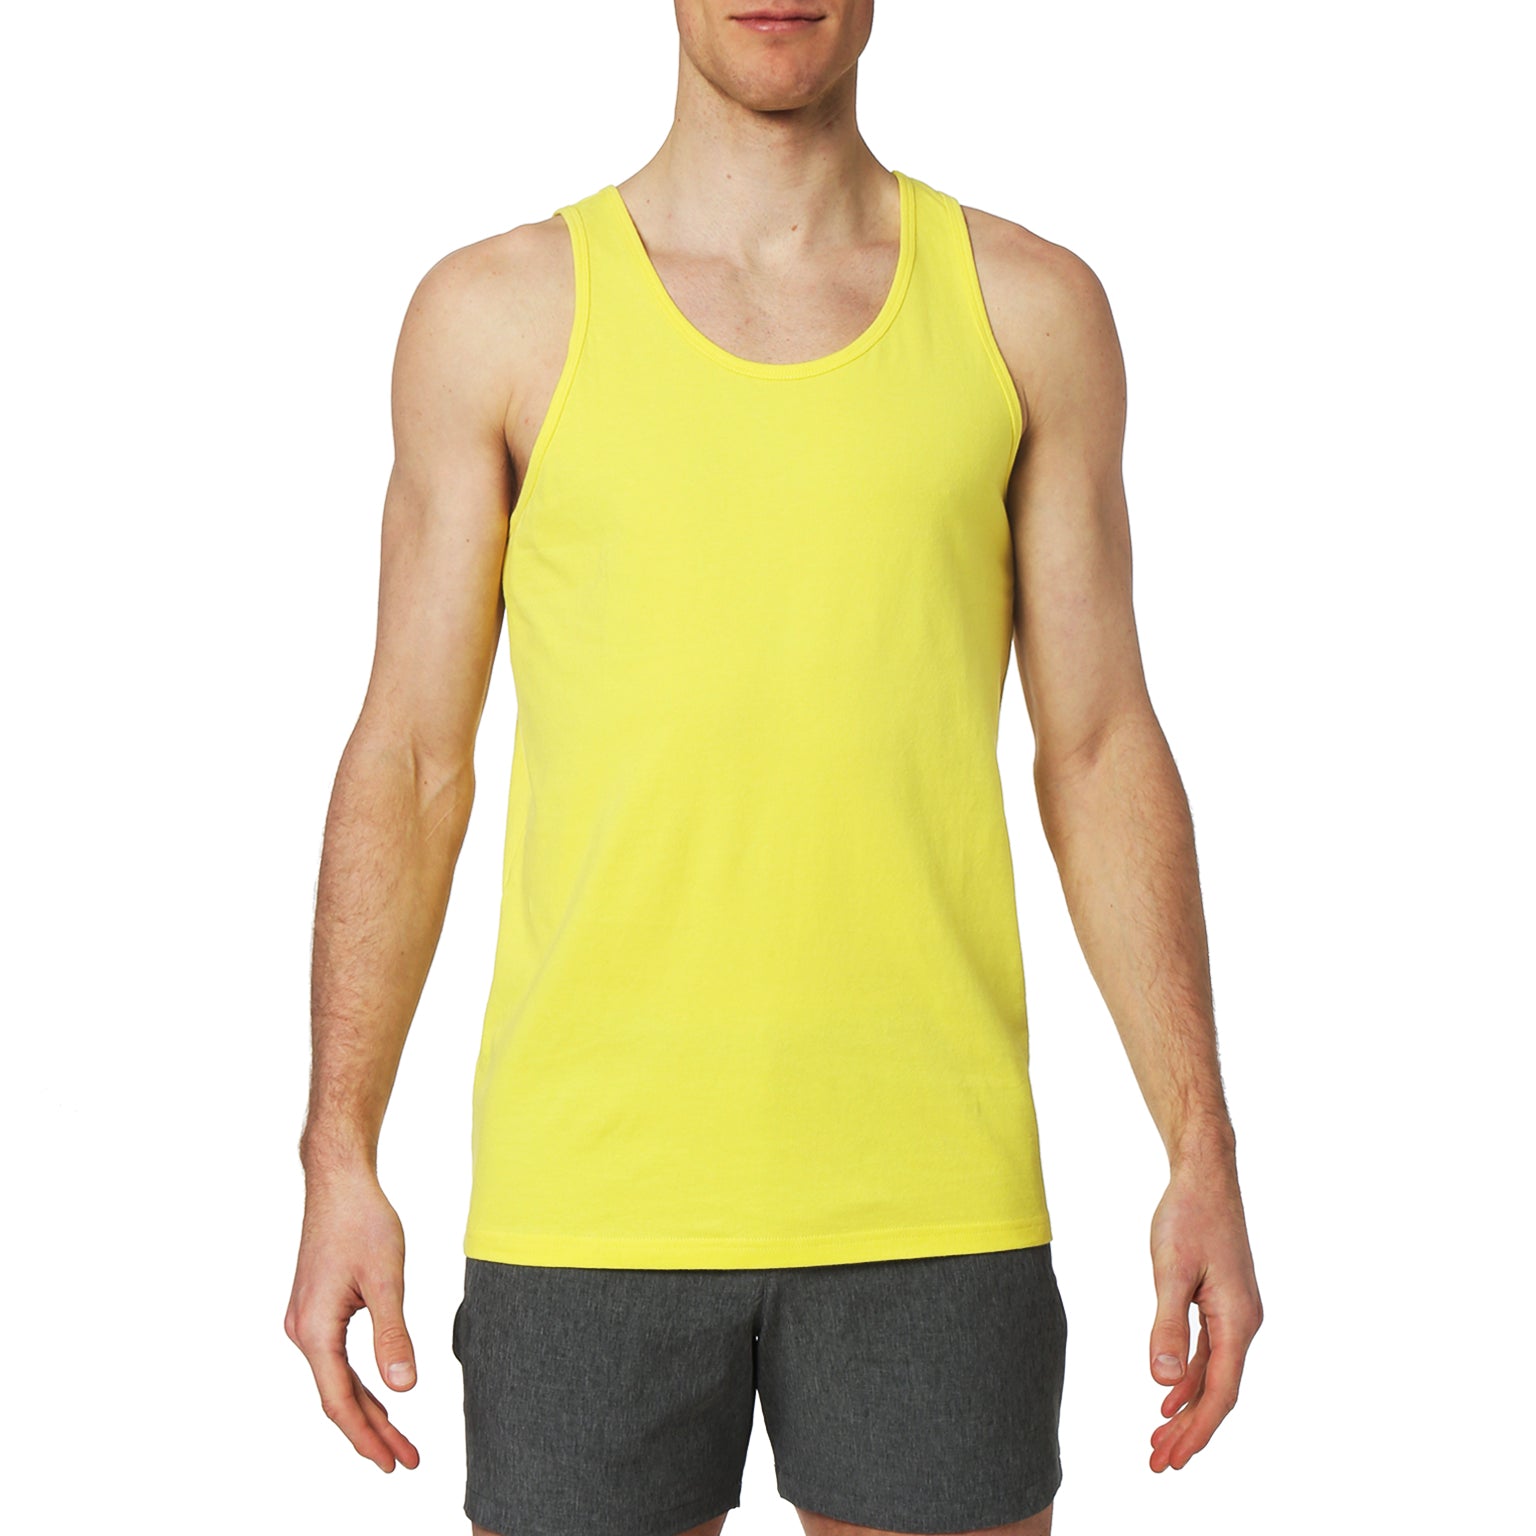 ACTIONWEAR- Canary Solid Essential Cotton Tank Top